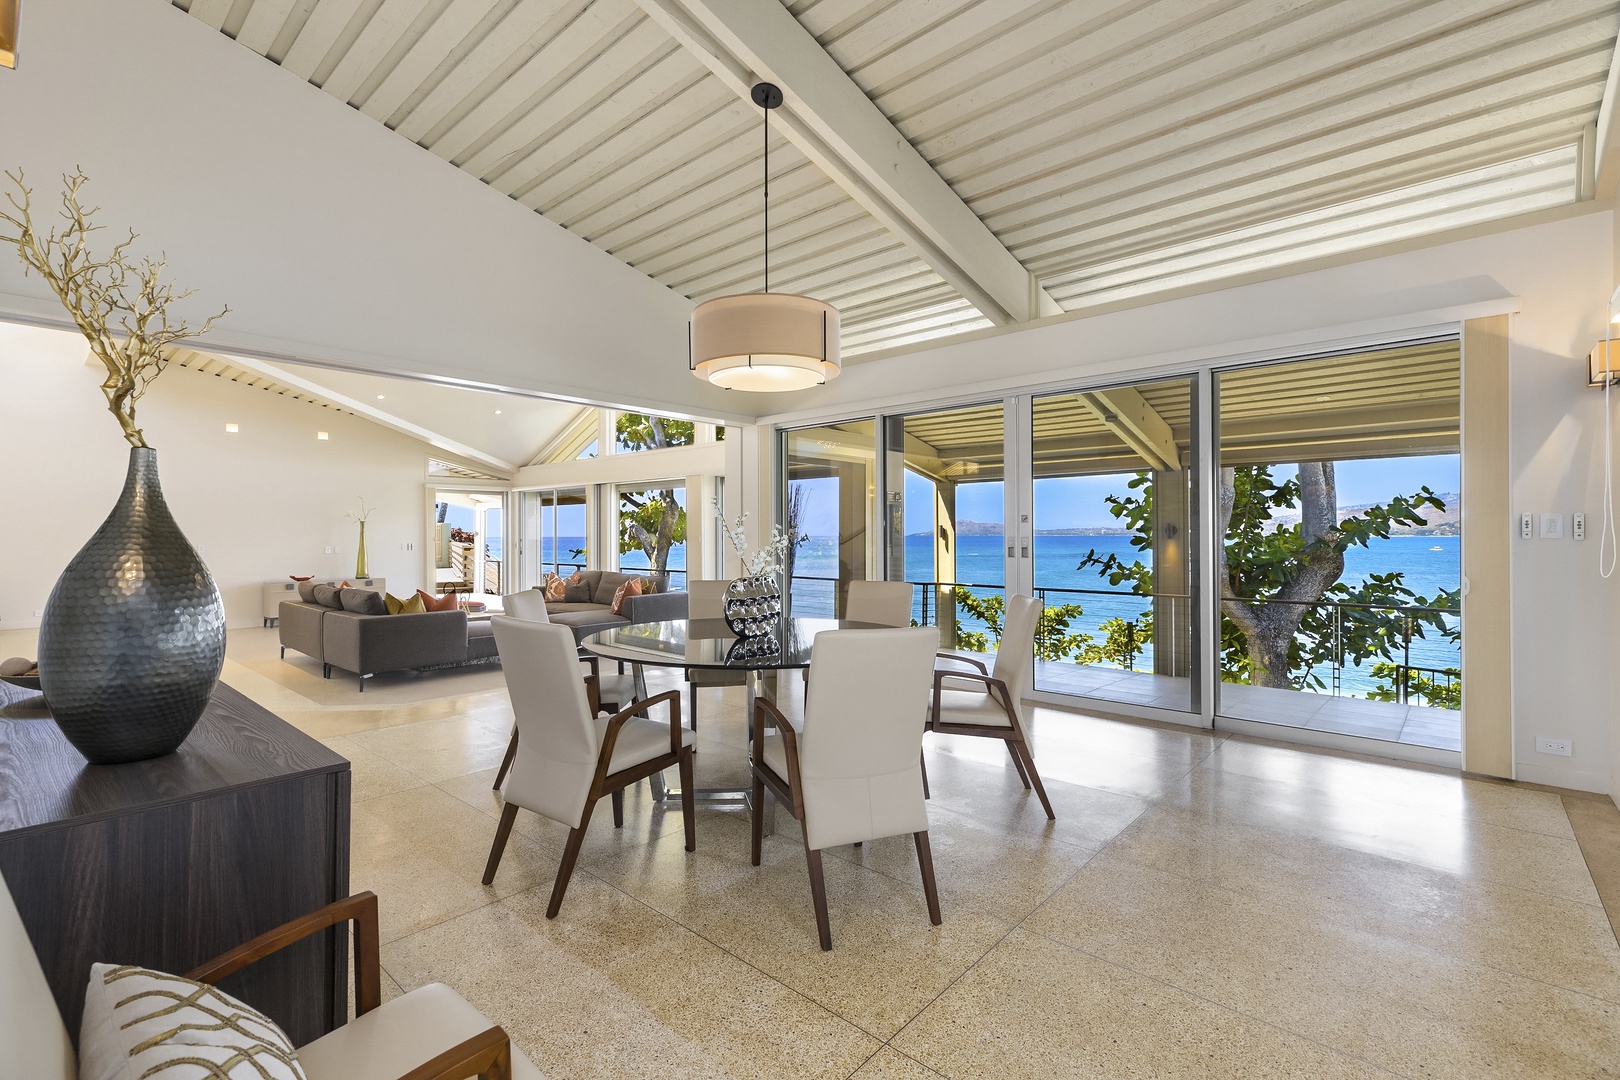 Honolulu Vacation Rentals, Hanapepe House - Dining Room with Ocean Views